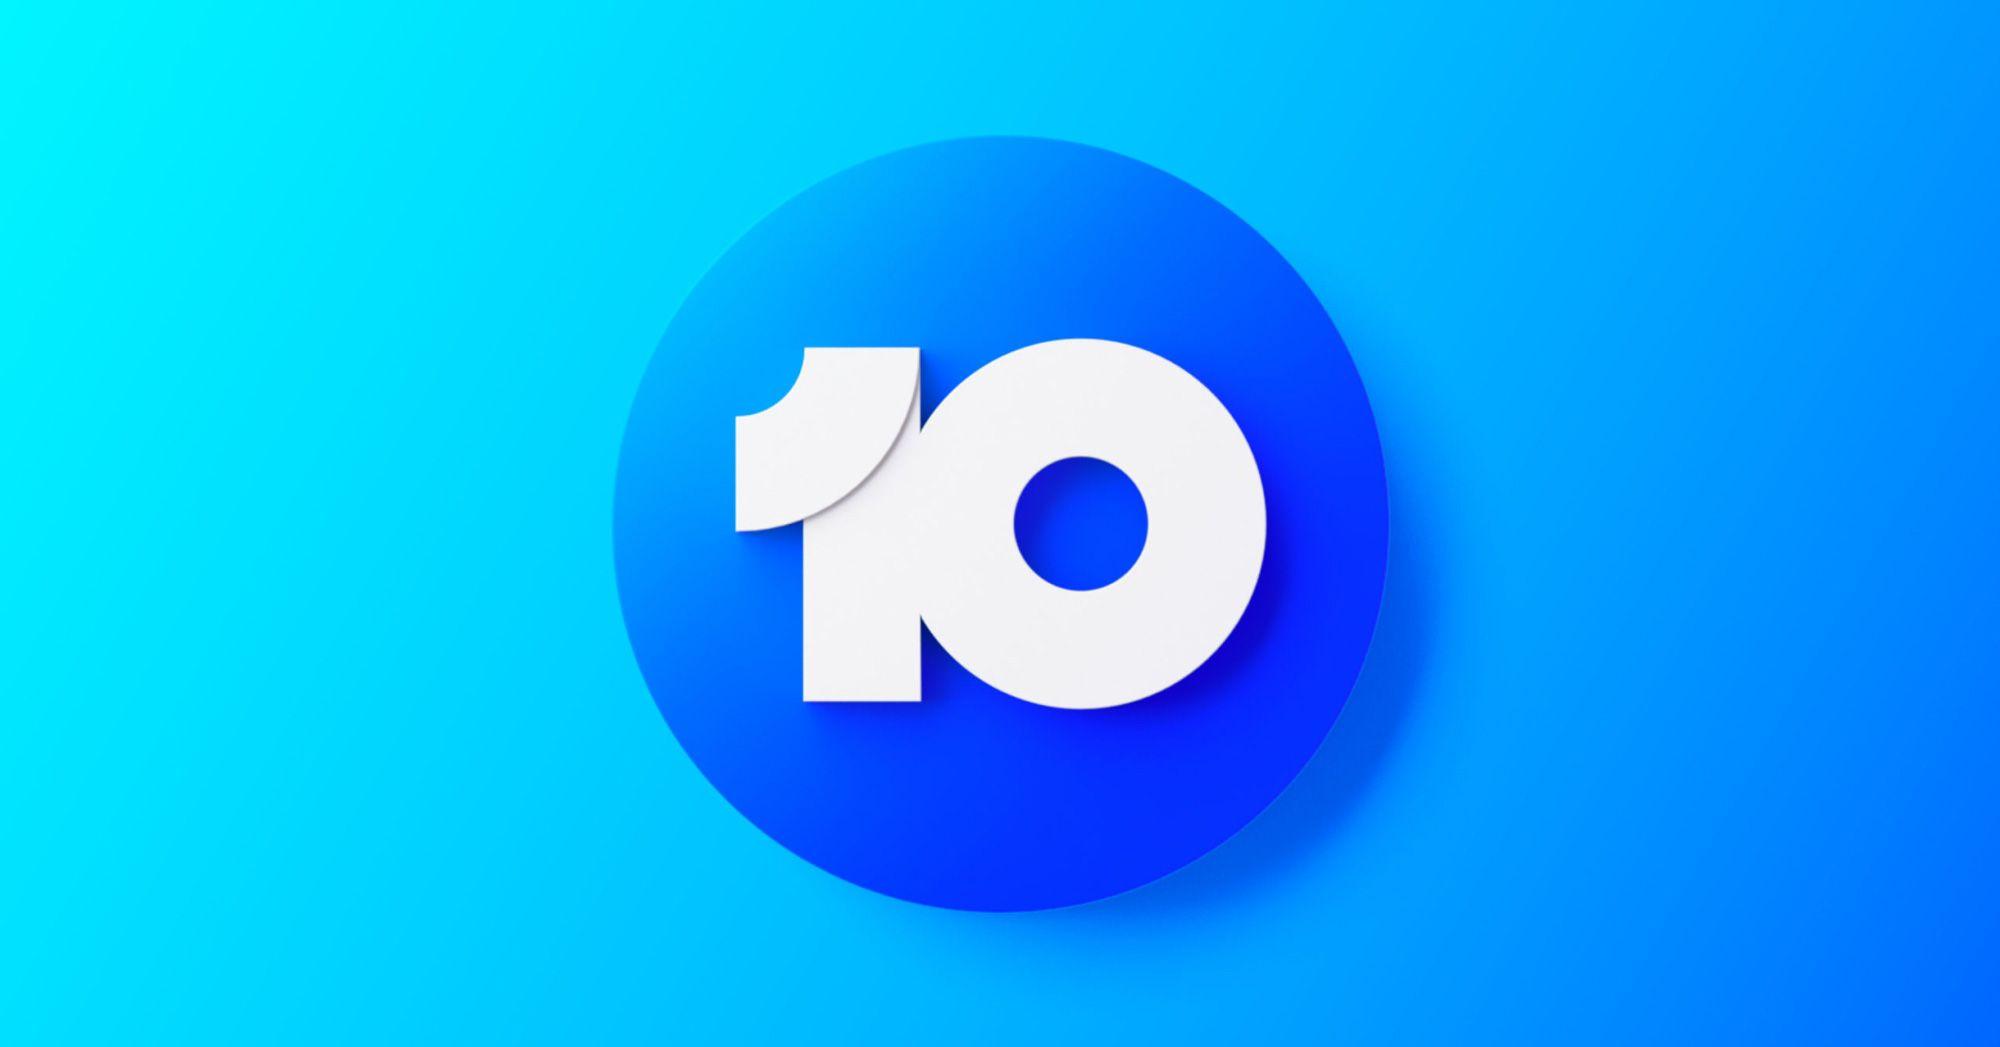 10 Logo - Brand New: New Logo and On-air Look for Network 10 by Principals and ...